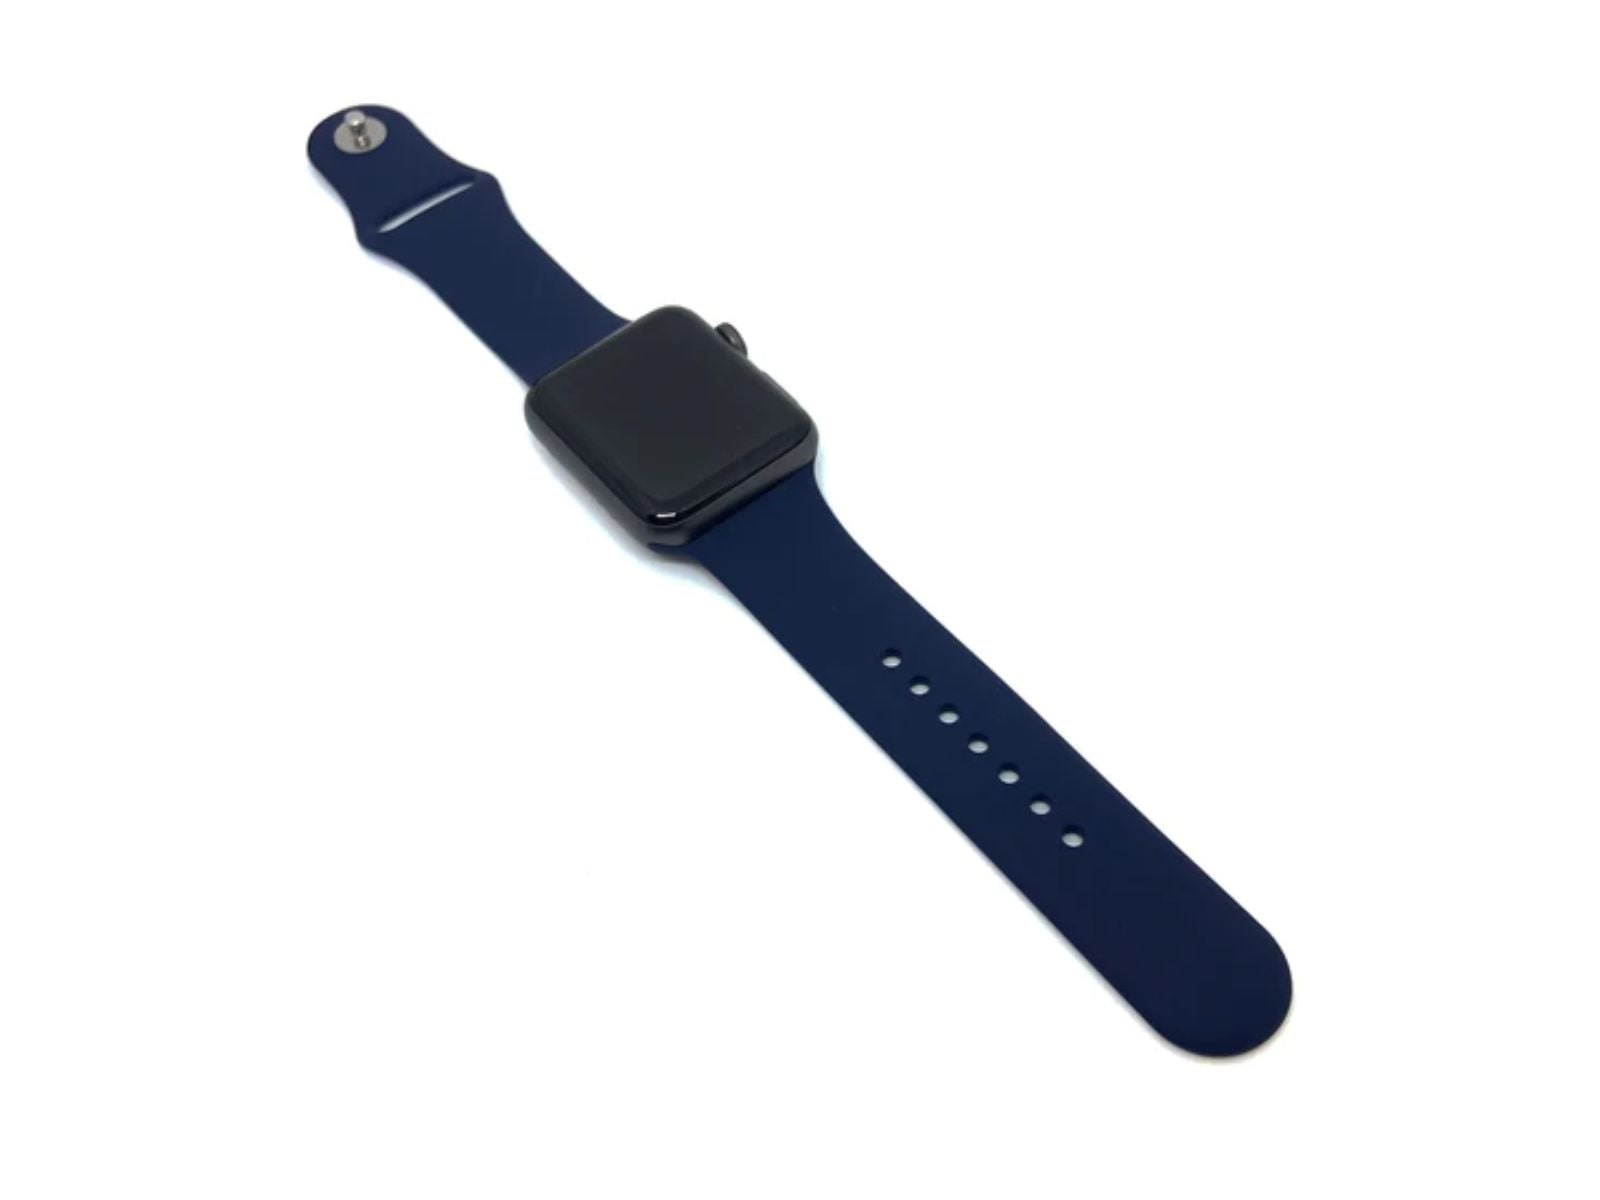 Image shows an overhead view of the navy Apple Watch Strap on an apple watch